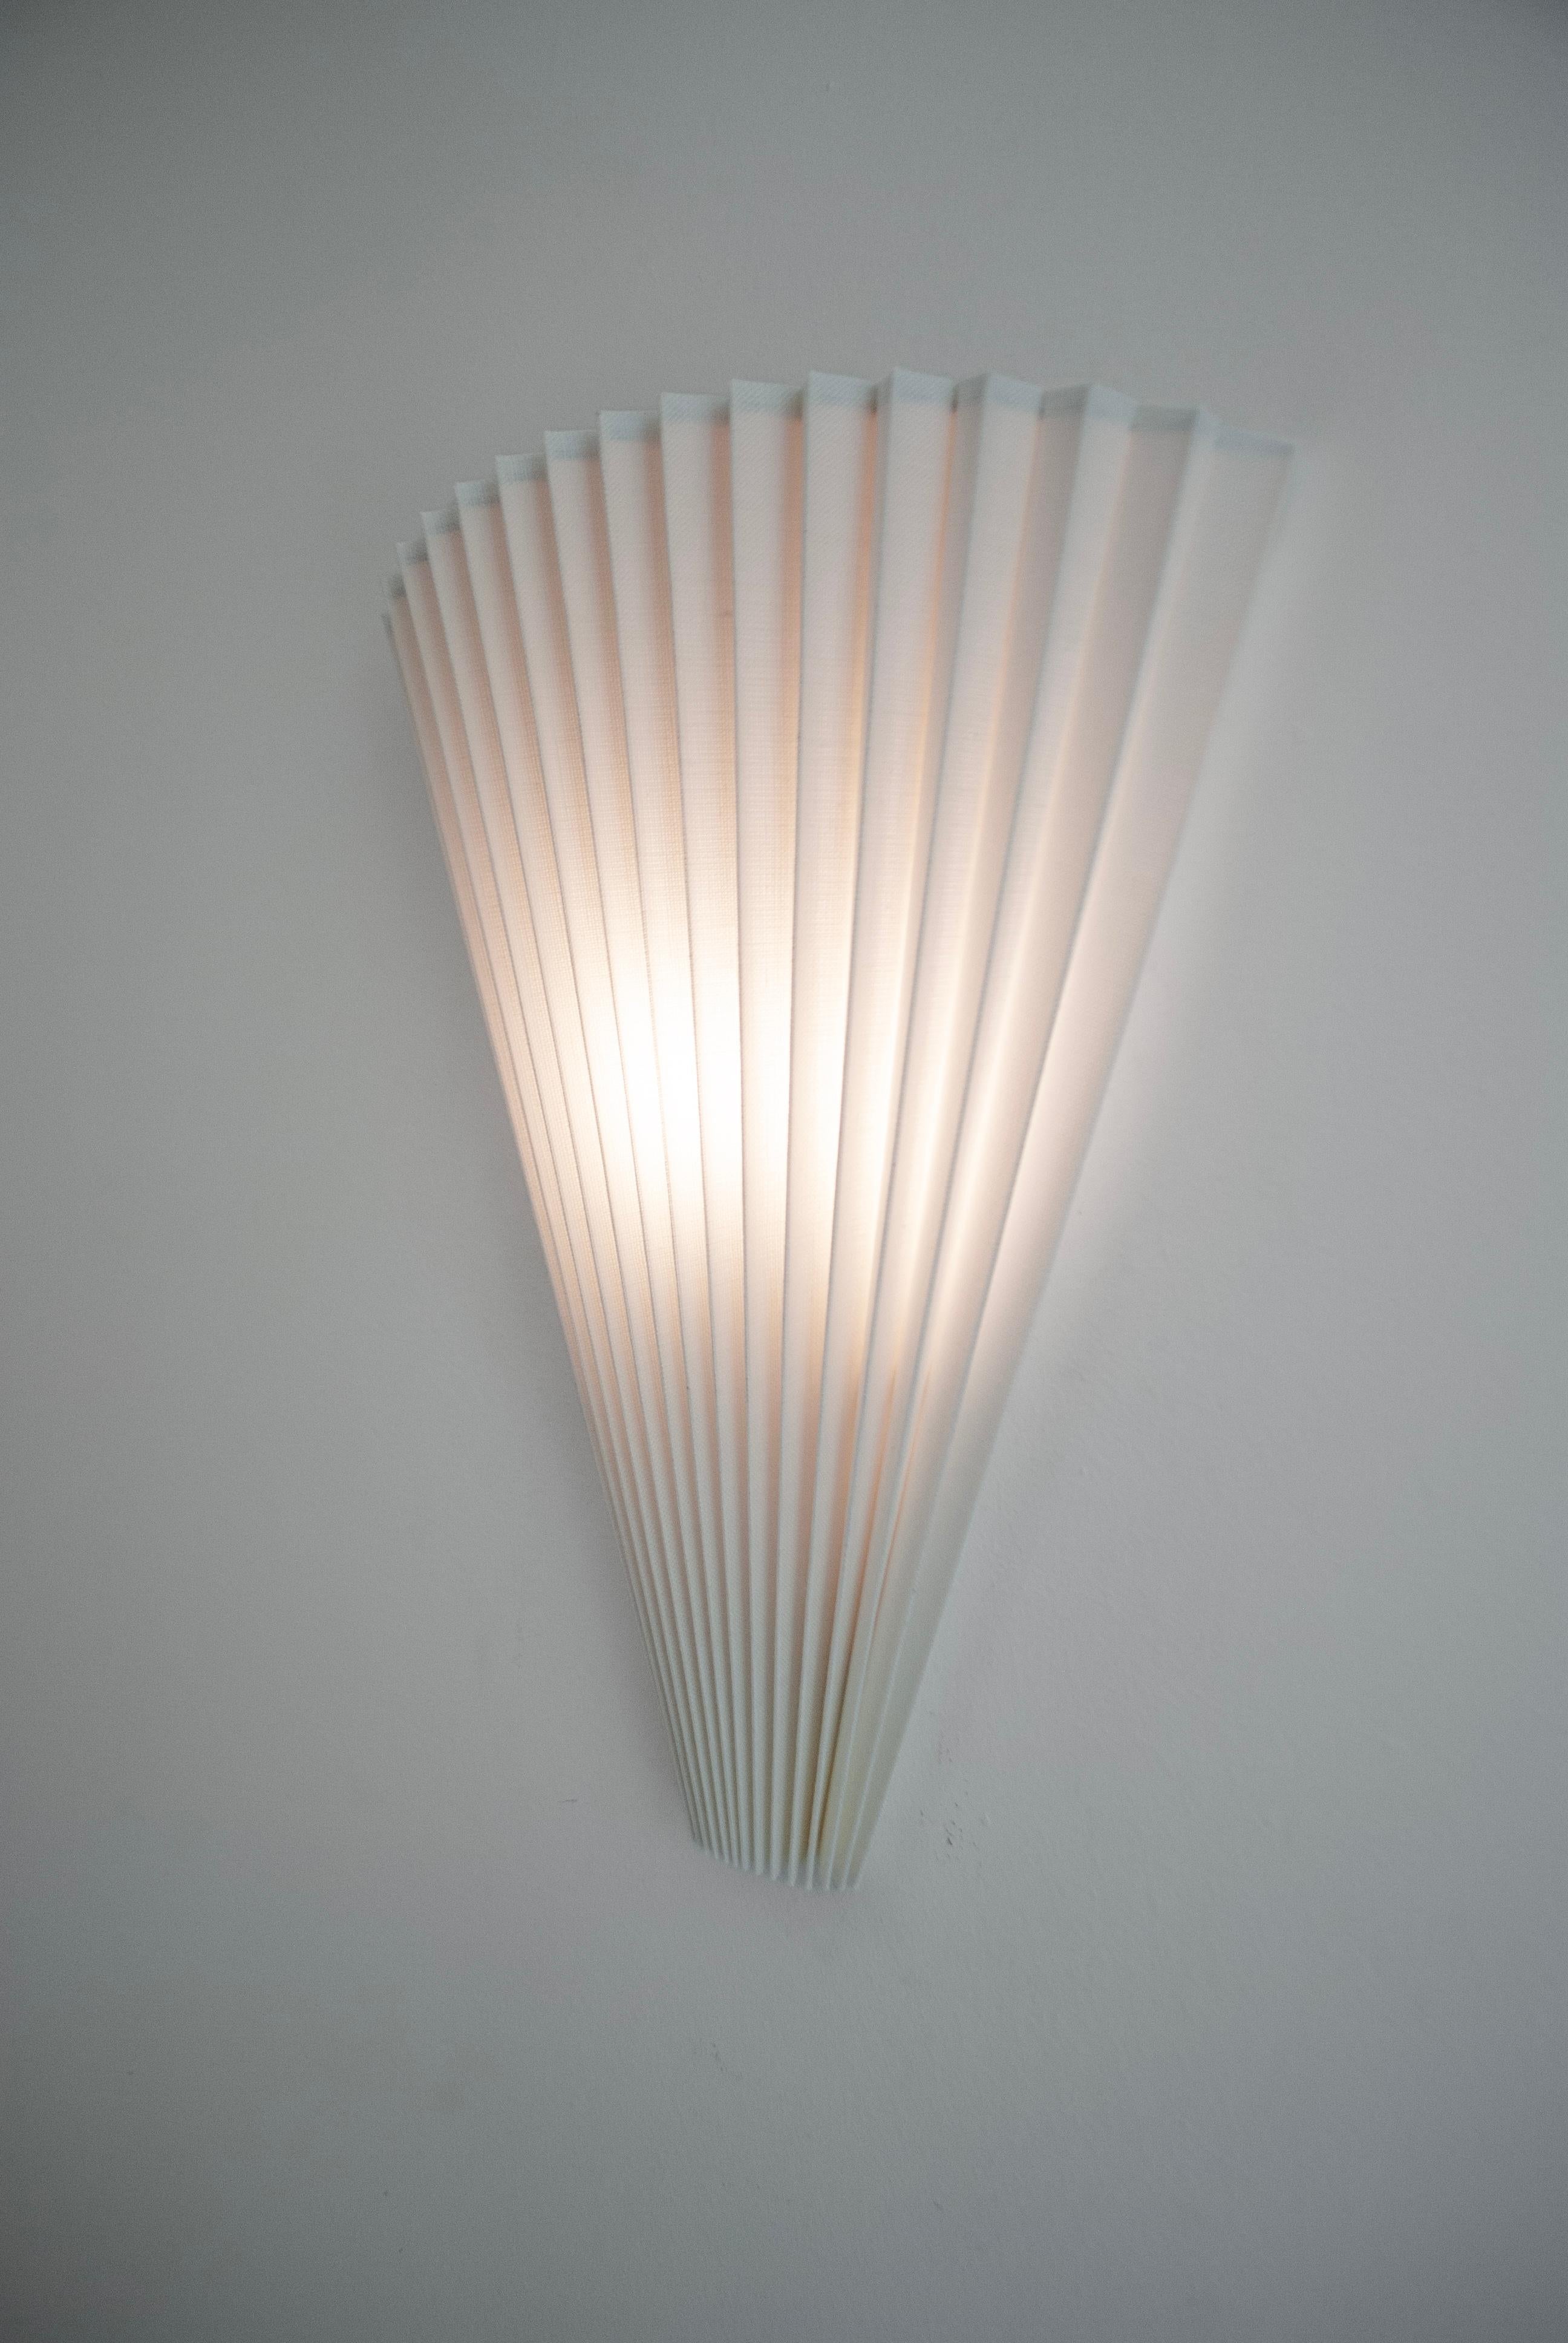 Metal Contemporary Pleated Fan Light with Linen Shade off-white Handmade Set of 8no. For Sale